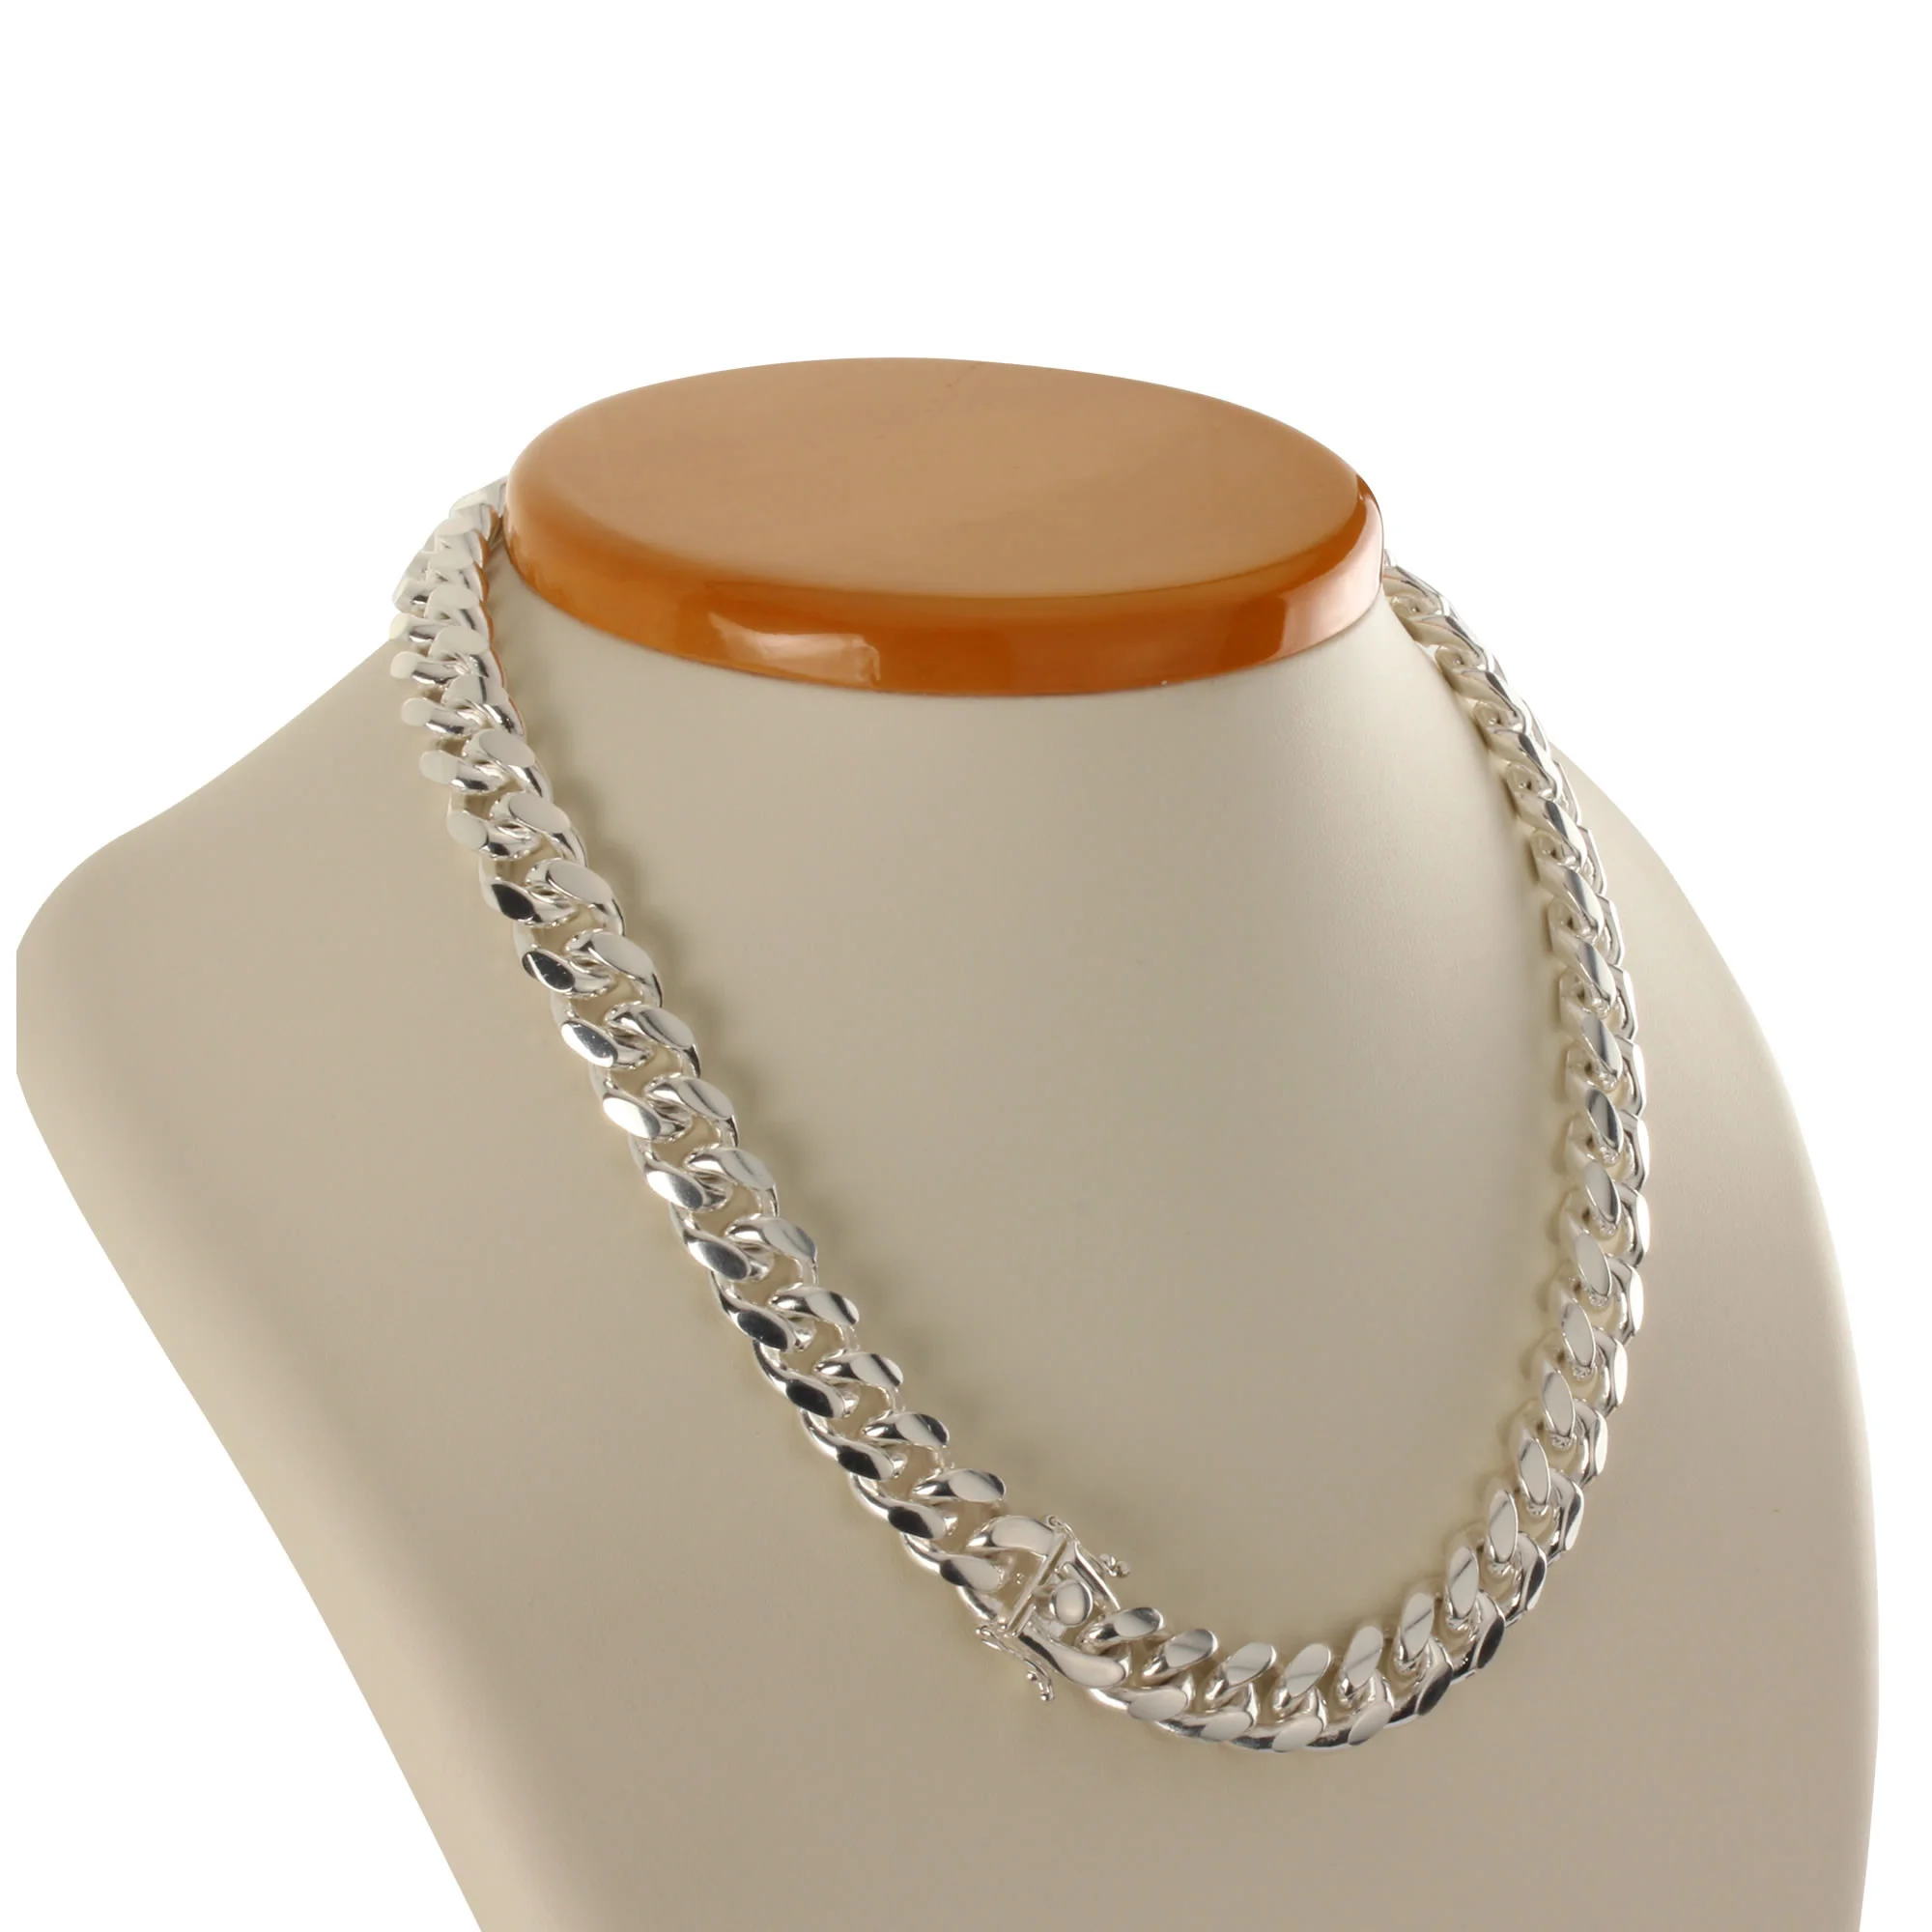 12mm Wide Solid Sterling Silver Heavy Miami Cuban Curb Chain With Box Lock